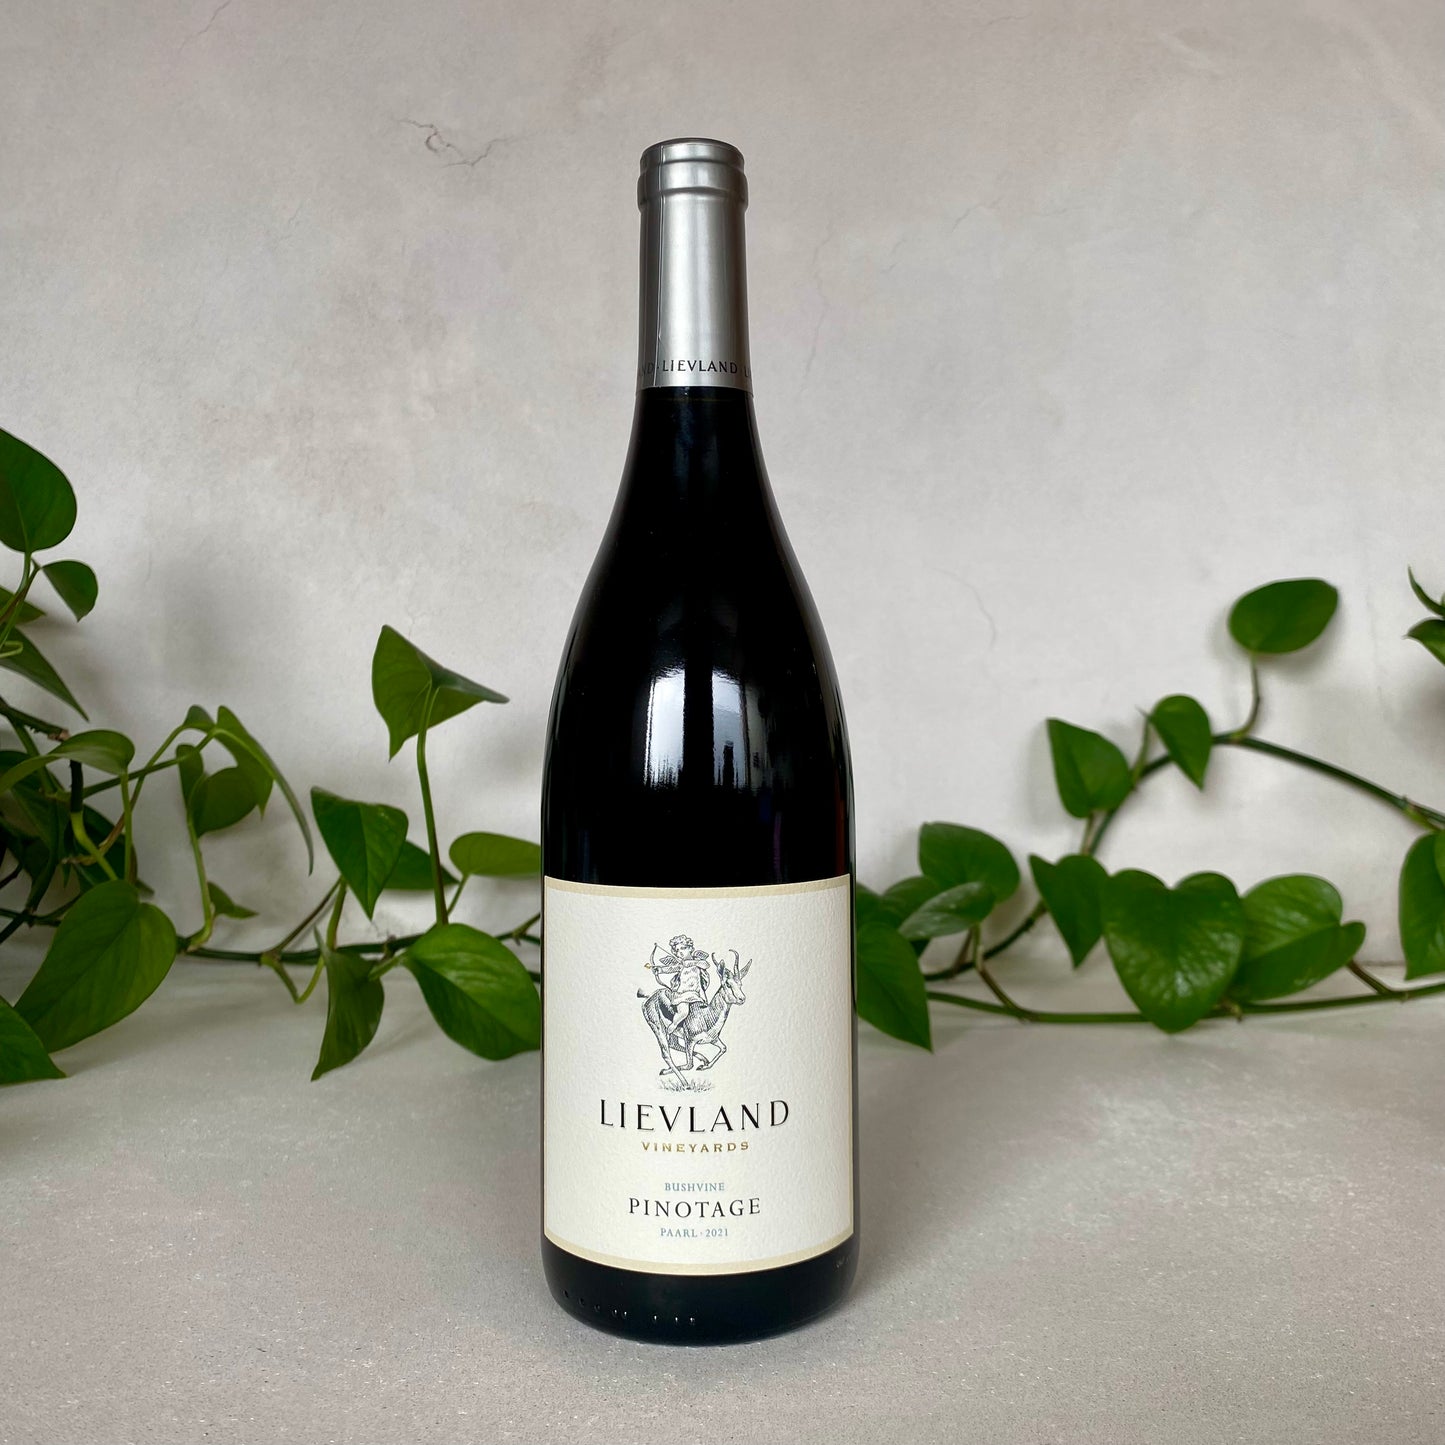 Lievland - Pinotage - Paarl, South Africa